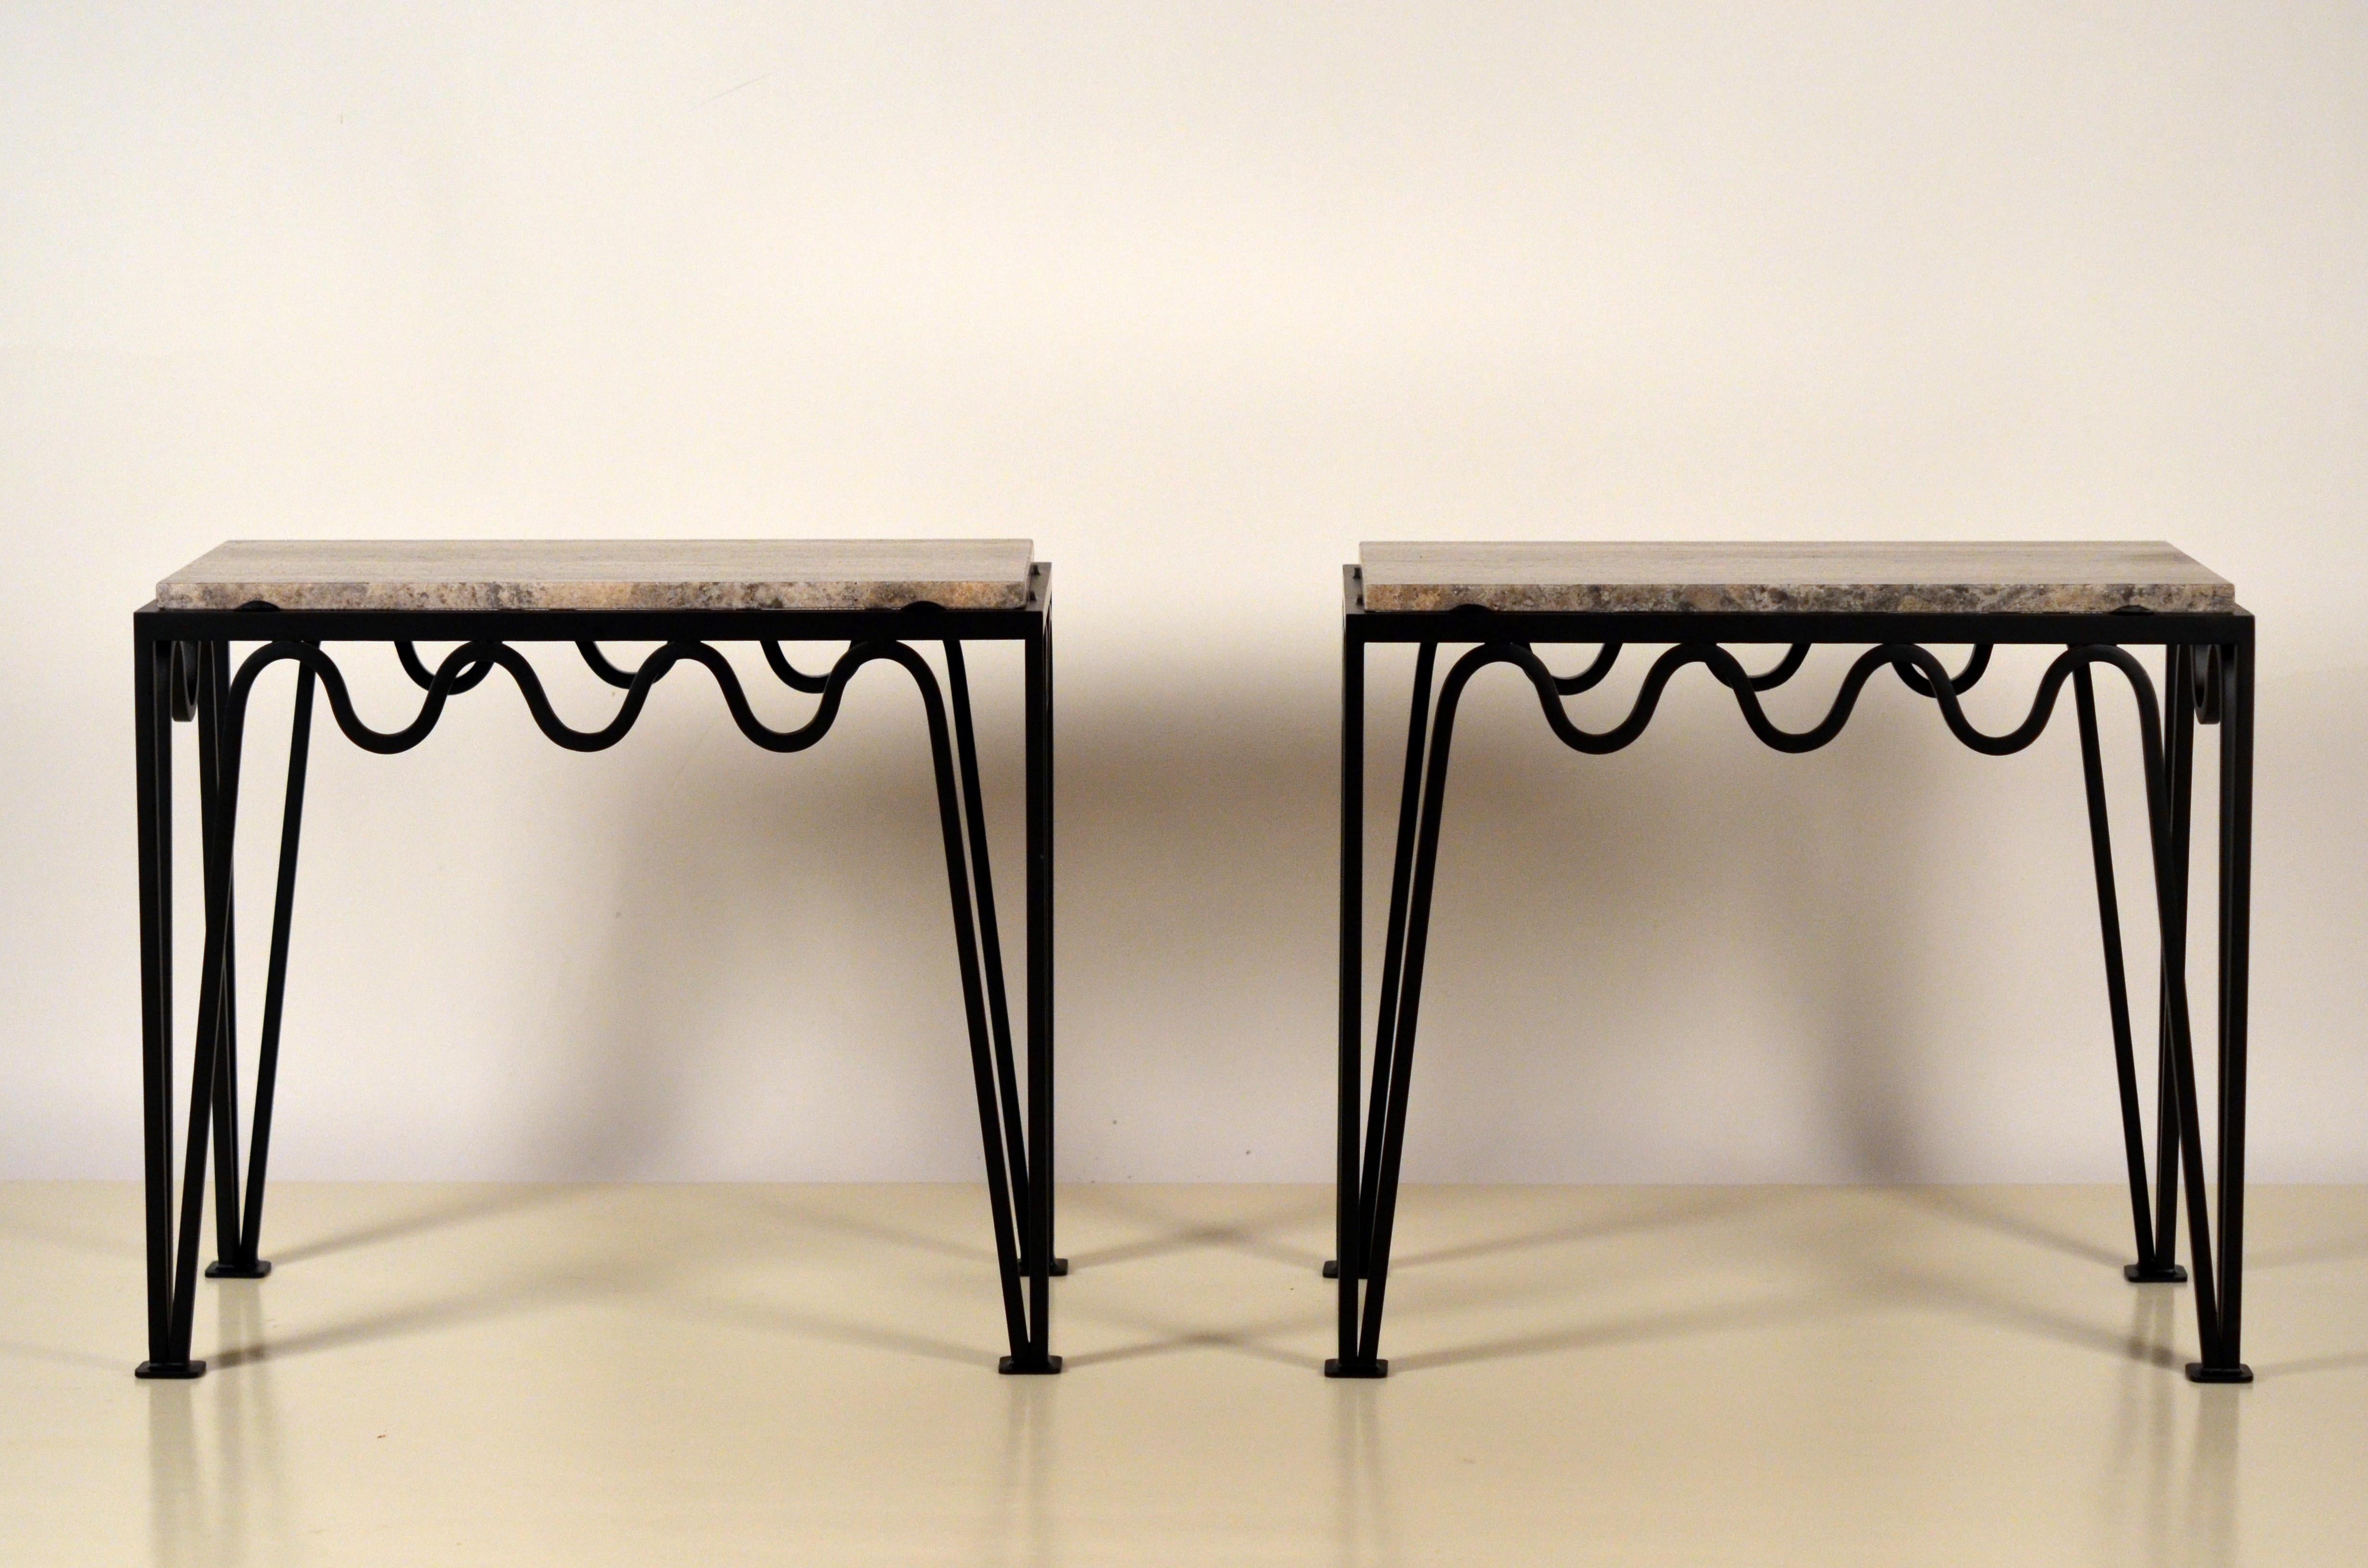 Organic Modern Pair of 'Méandre' Black Iron and Silver Travertine Side Tables by Design Frères For Sale